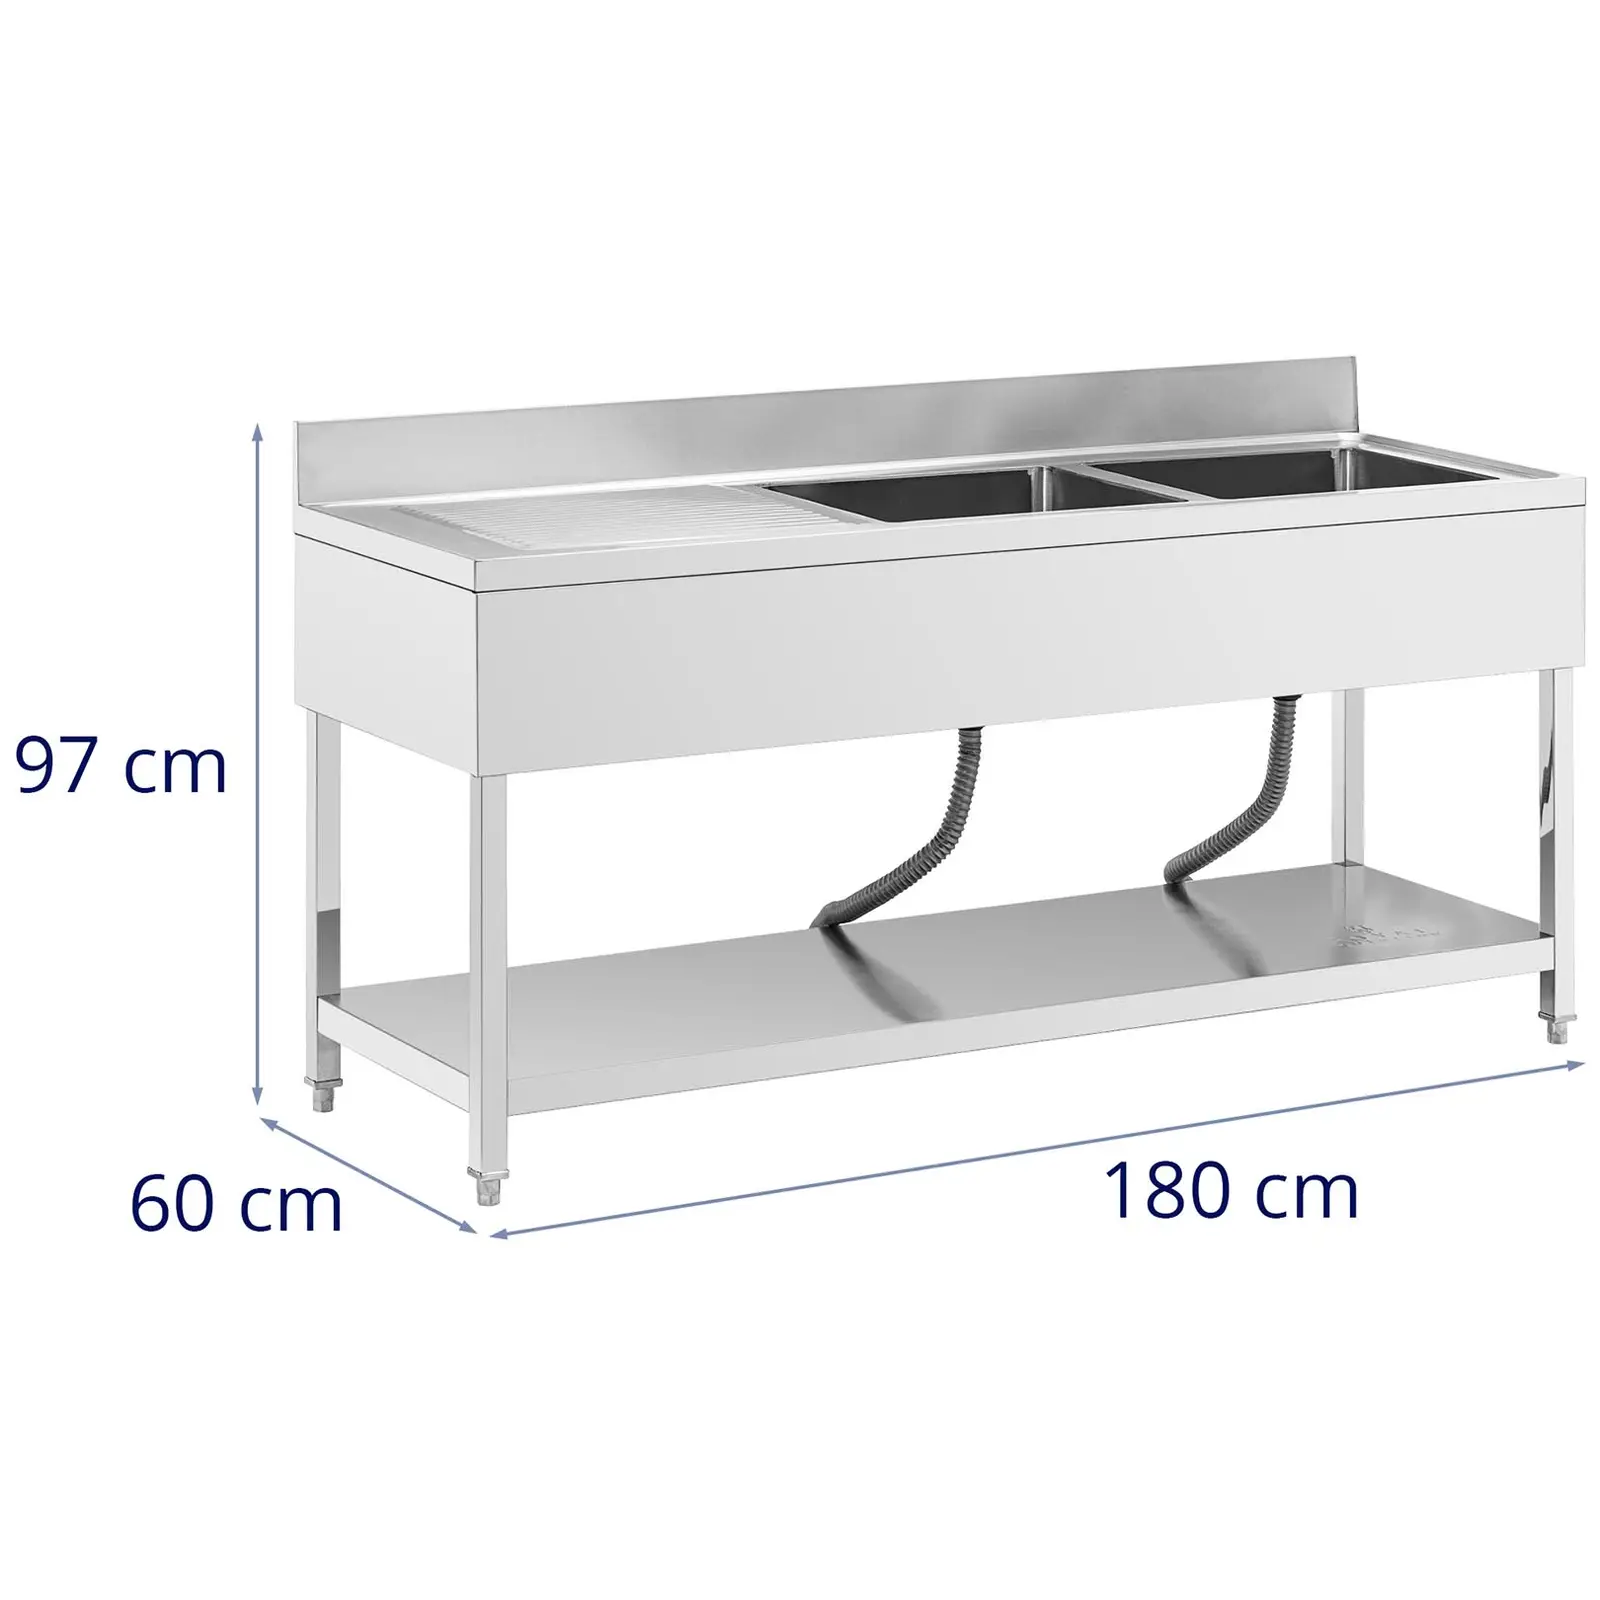 Sink Unit - 2 basins - stainless steel - 180 x 60 x 97 cm - Royal Catering